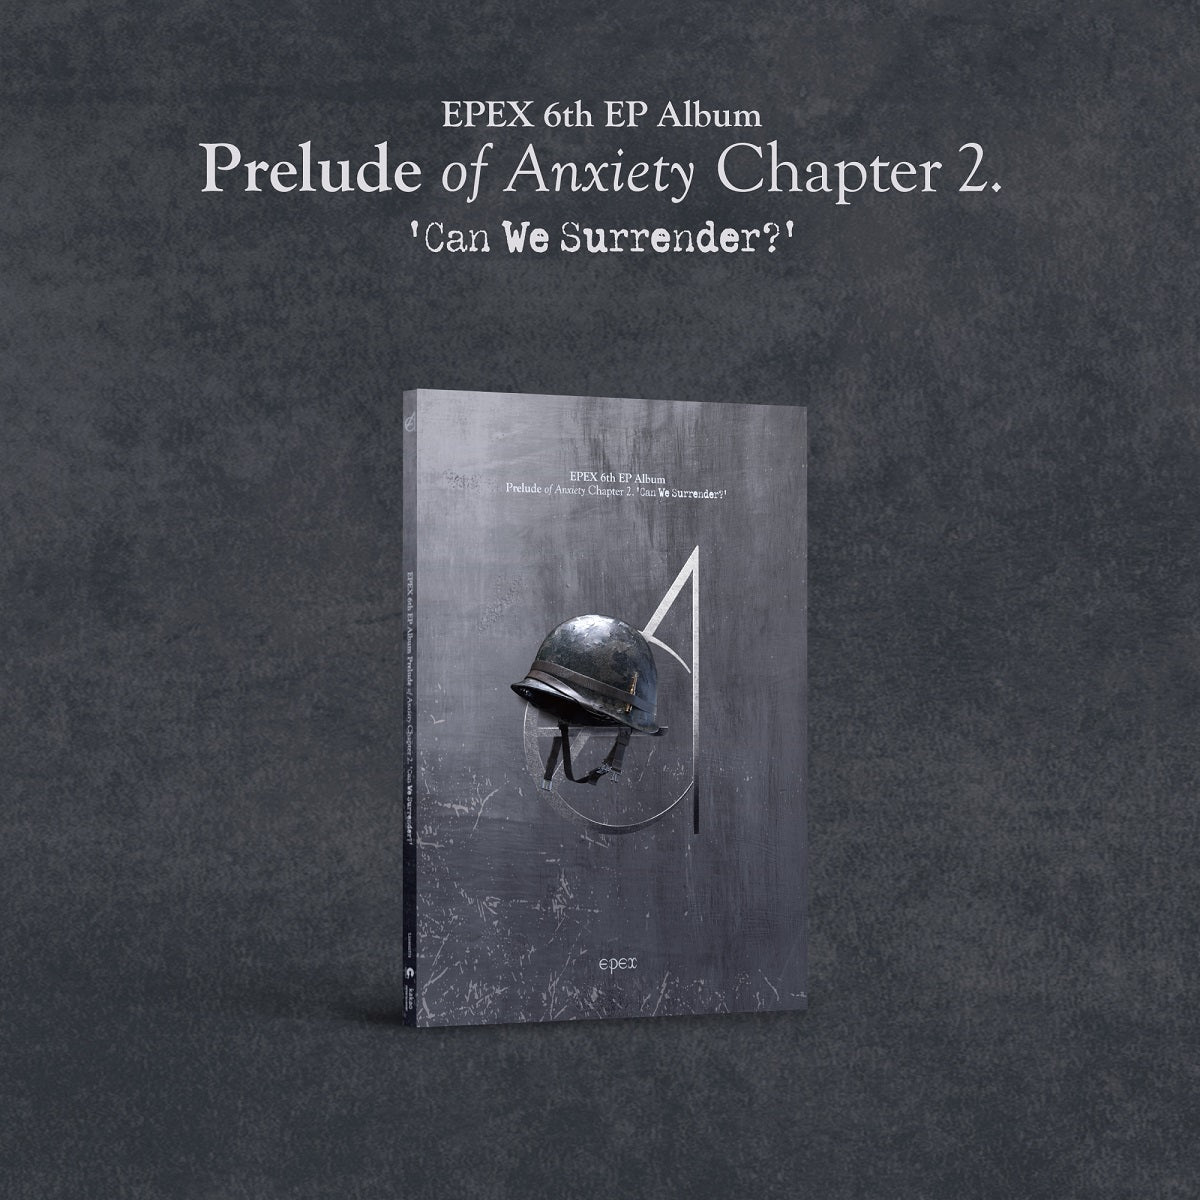 EPEX - 6th EP Album Prelude of Anxiety Chapter 2. Can We Surrender?